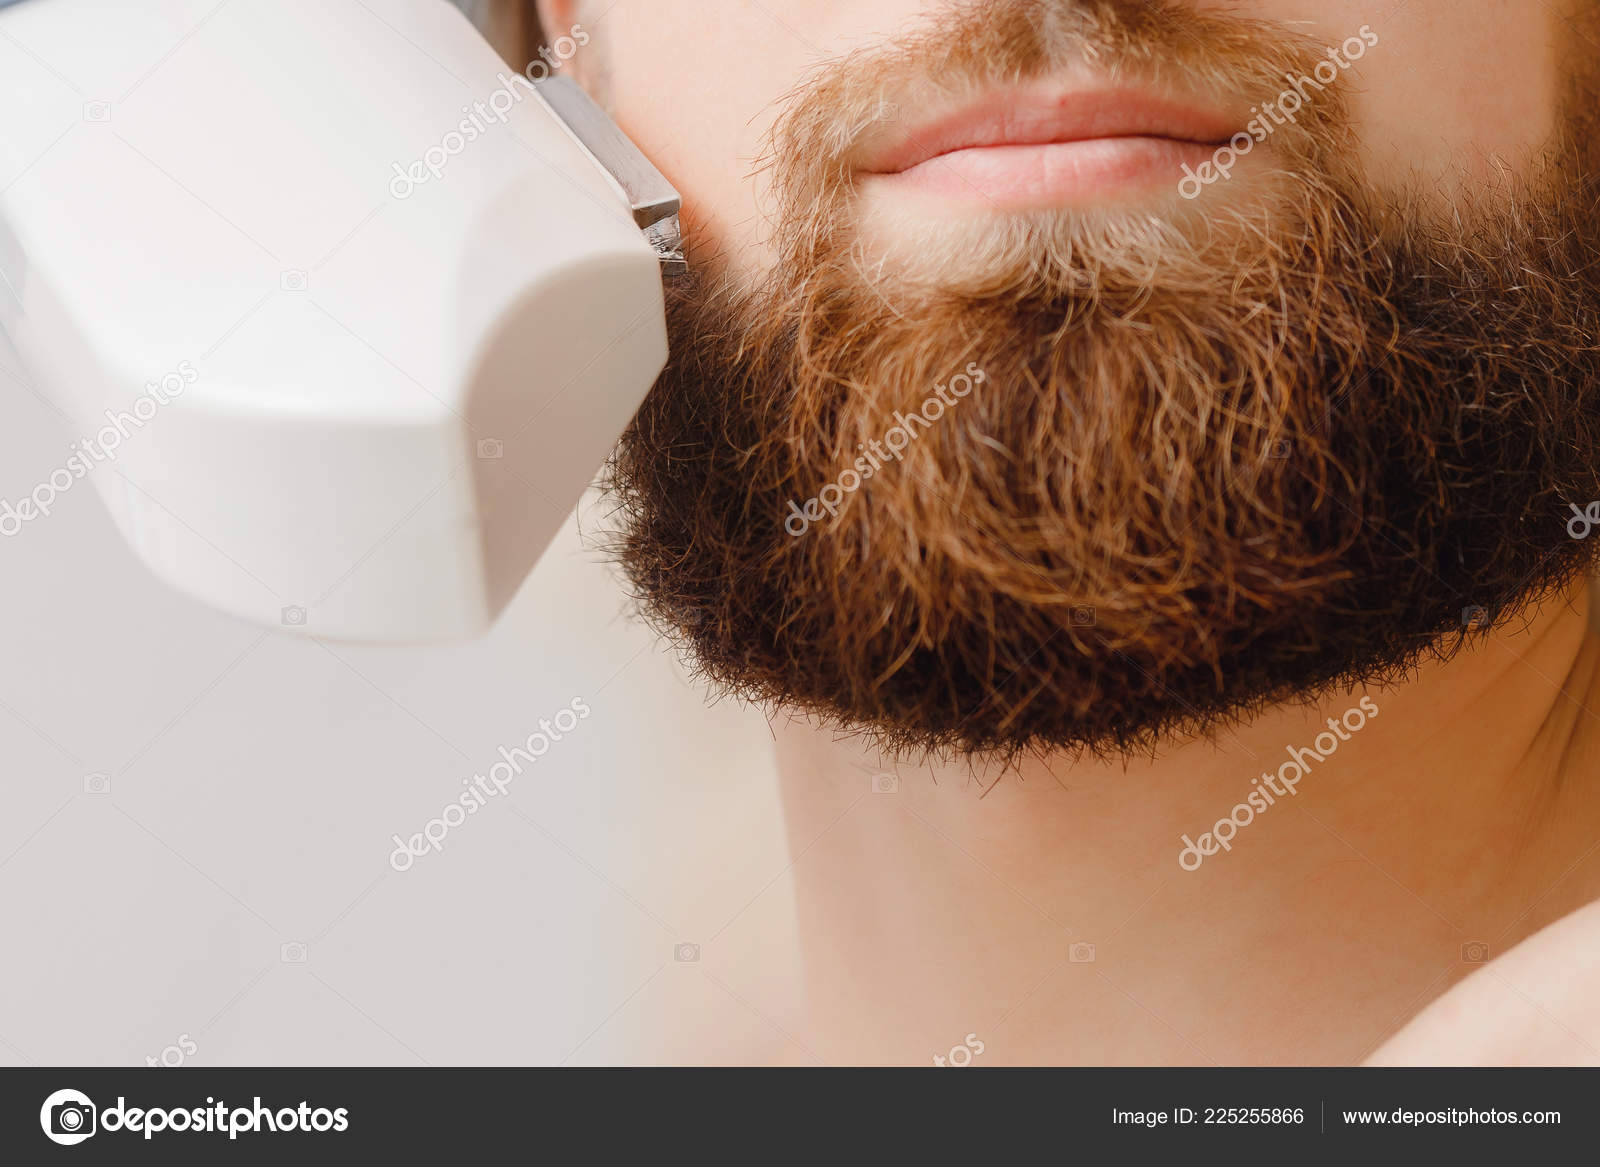 Male Depilation Laser Hair Removal Beard And Mustache Procedure Treatment In Salon Stock Photo C Parstud